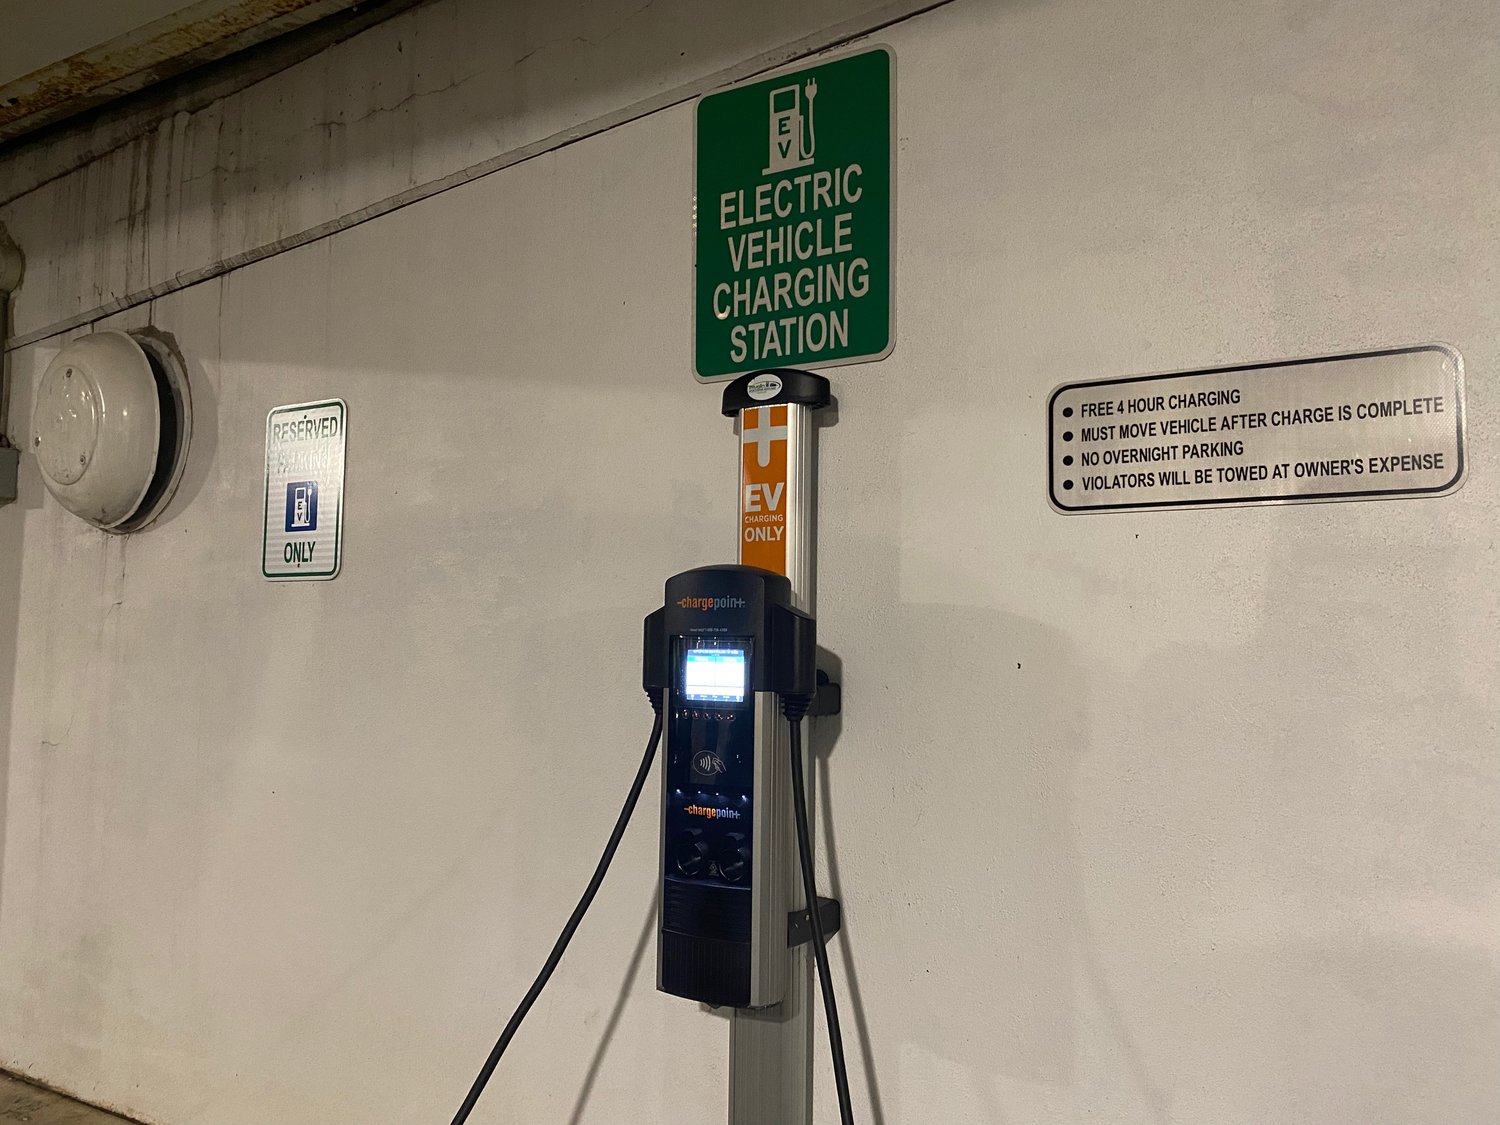 Electric vehicle drivers will now be charged 30-cent per kilowatt hour at the charging stations in Glen Cove’s Downtown Pulaski Street parking garage.